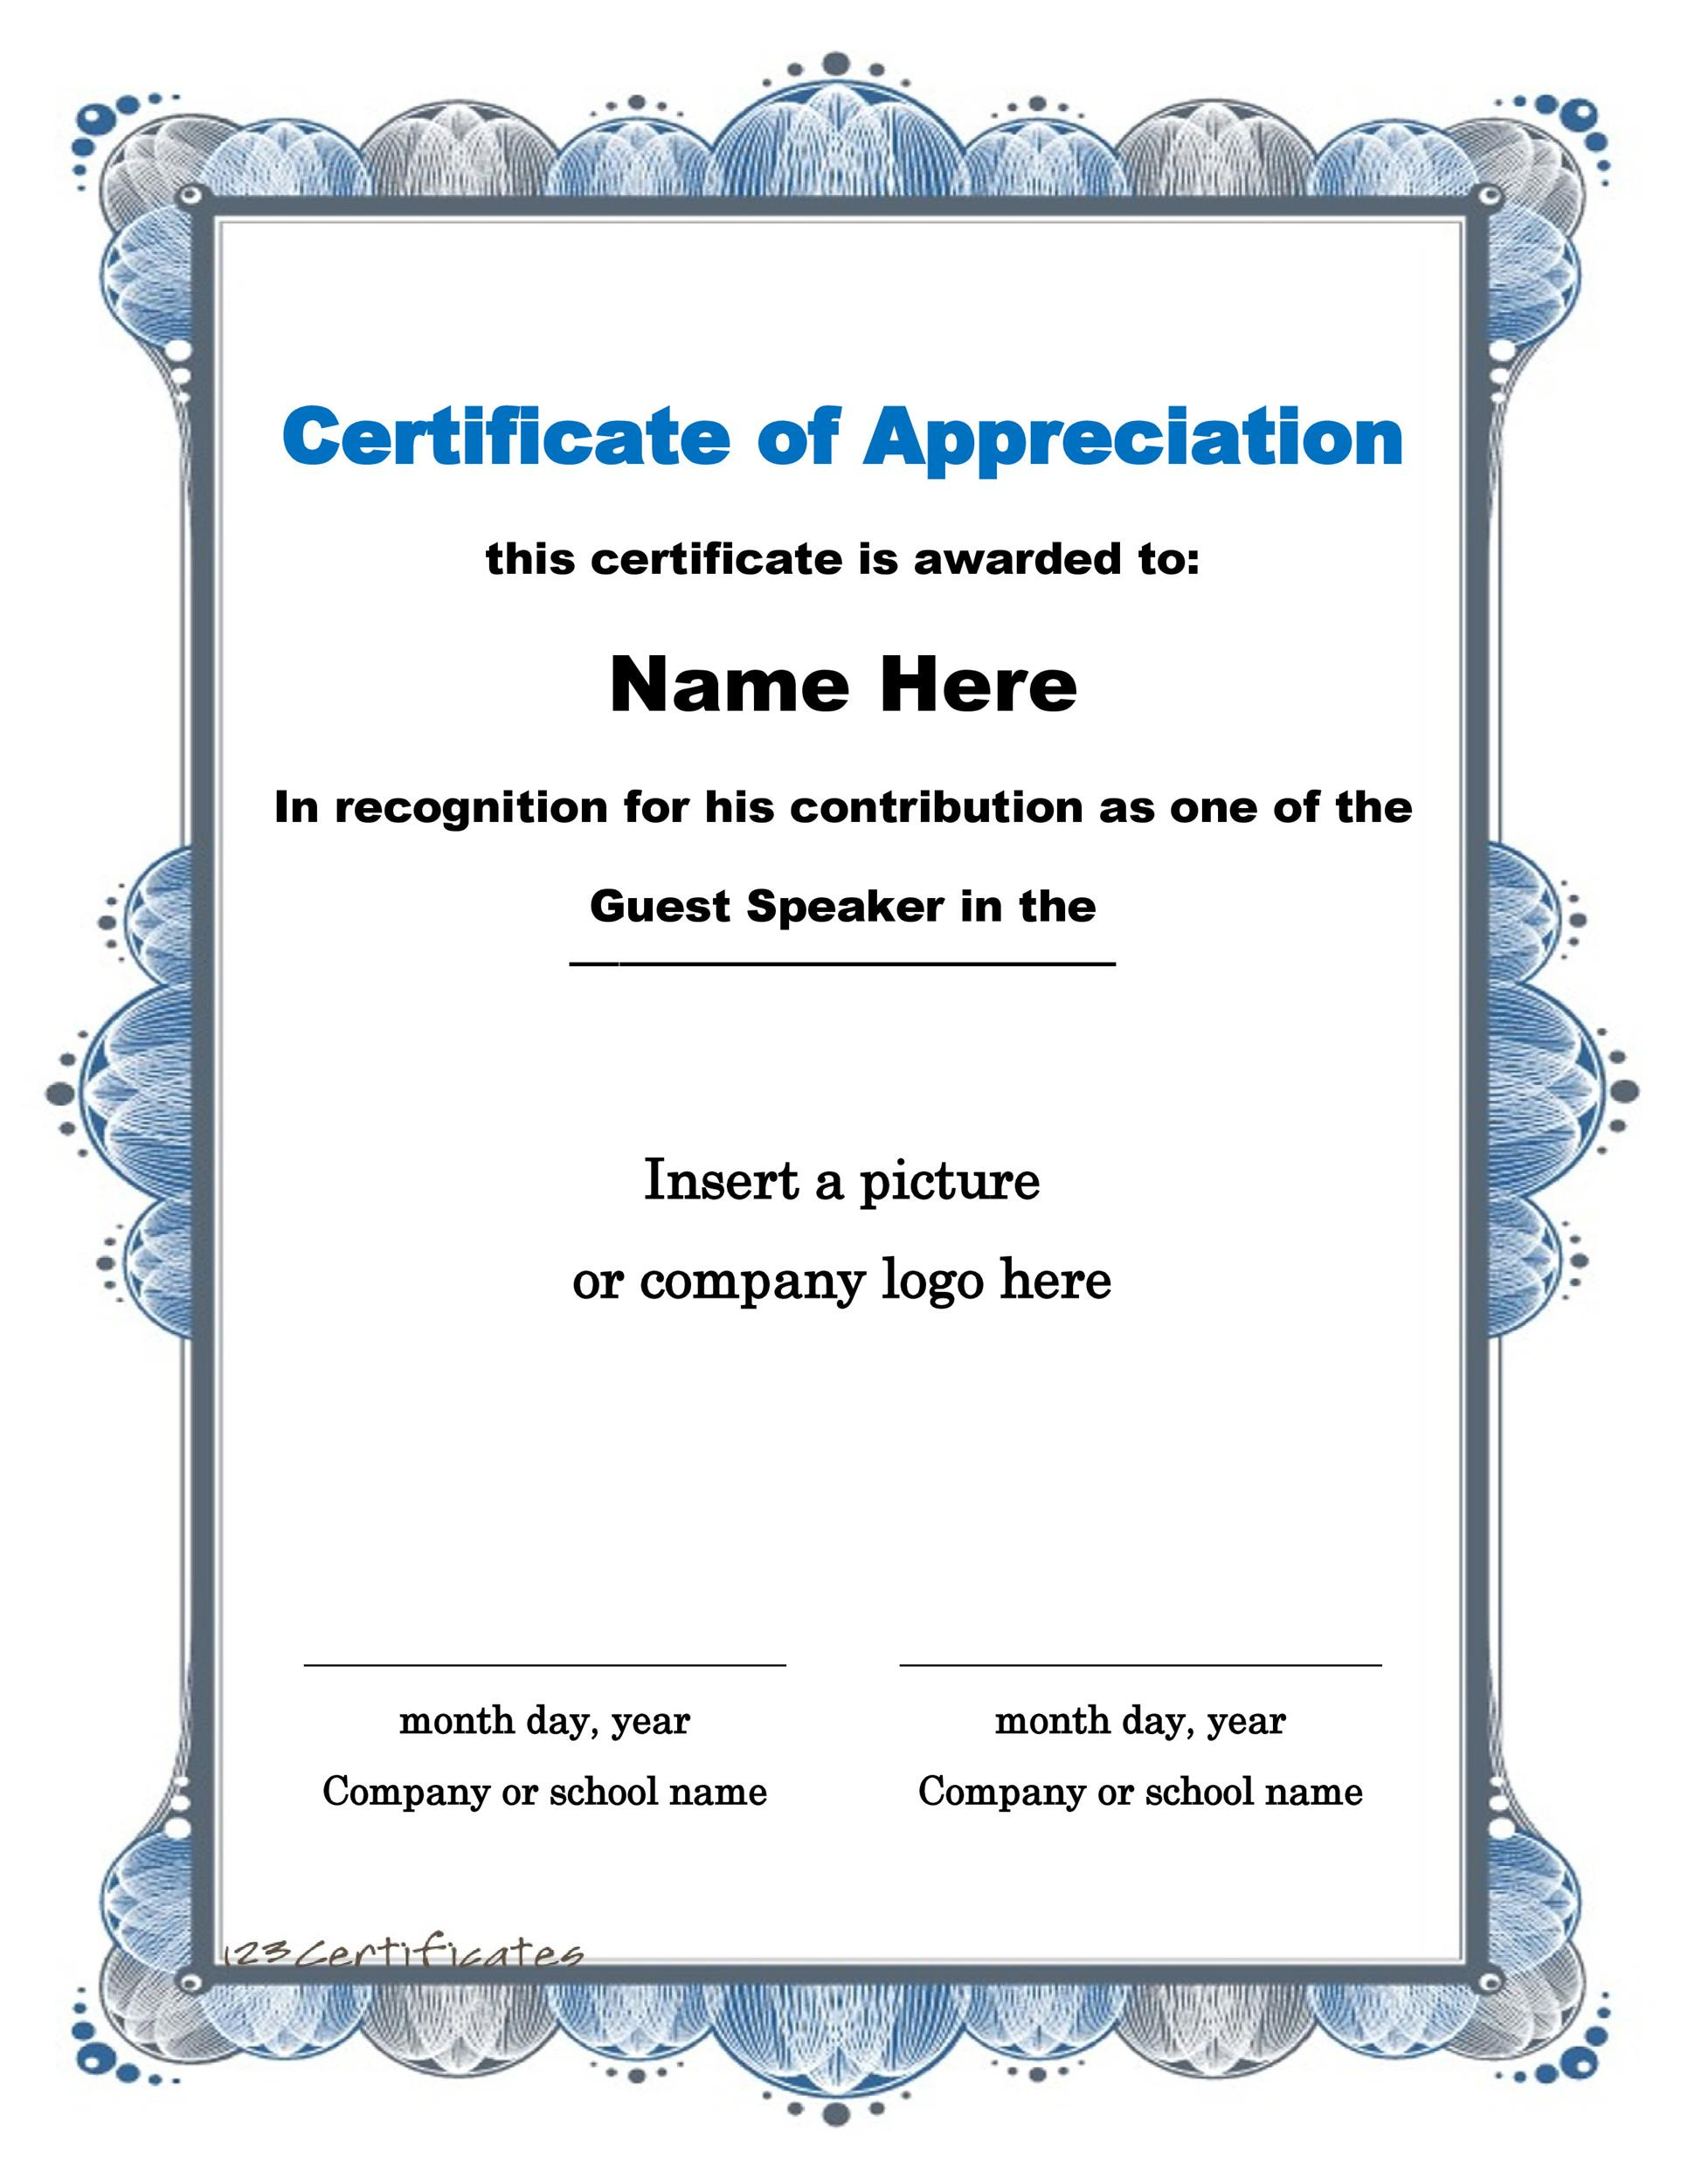 30 Free Certificate Of Appreciation Templates And Letters With Amazing Certificate Of Appreciation Template Free Printable